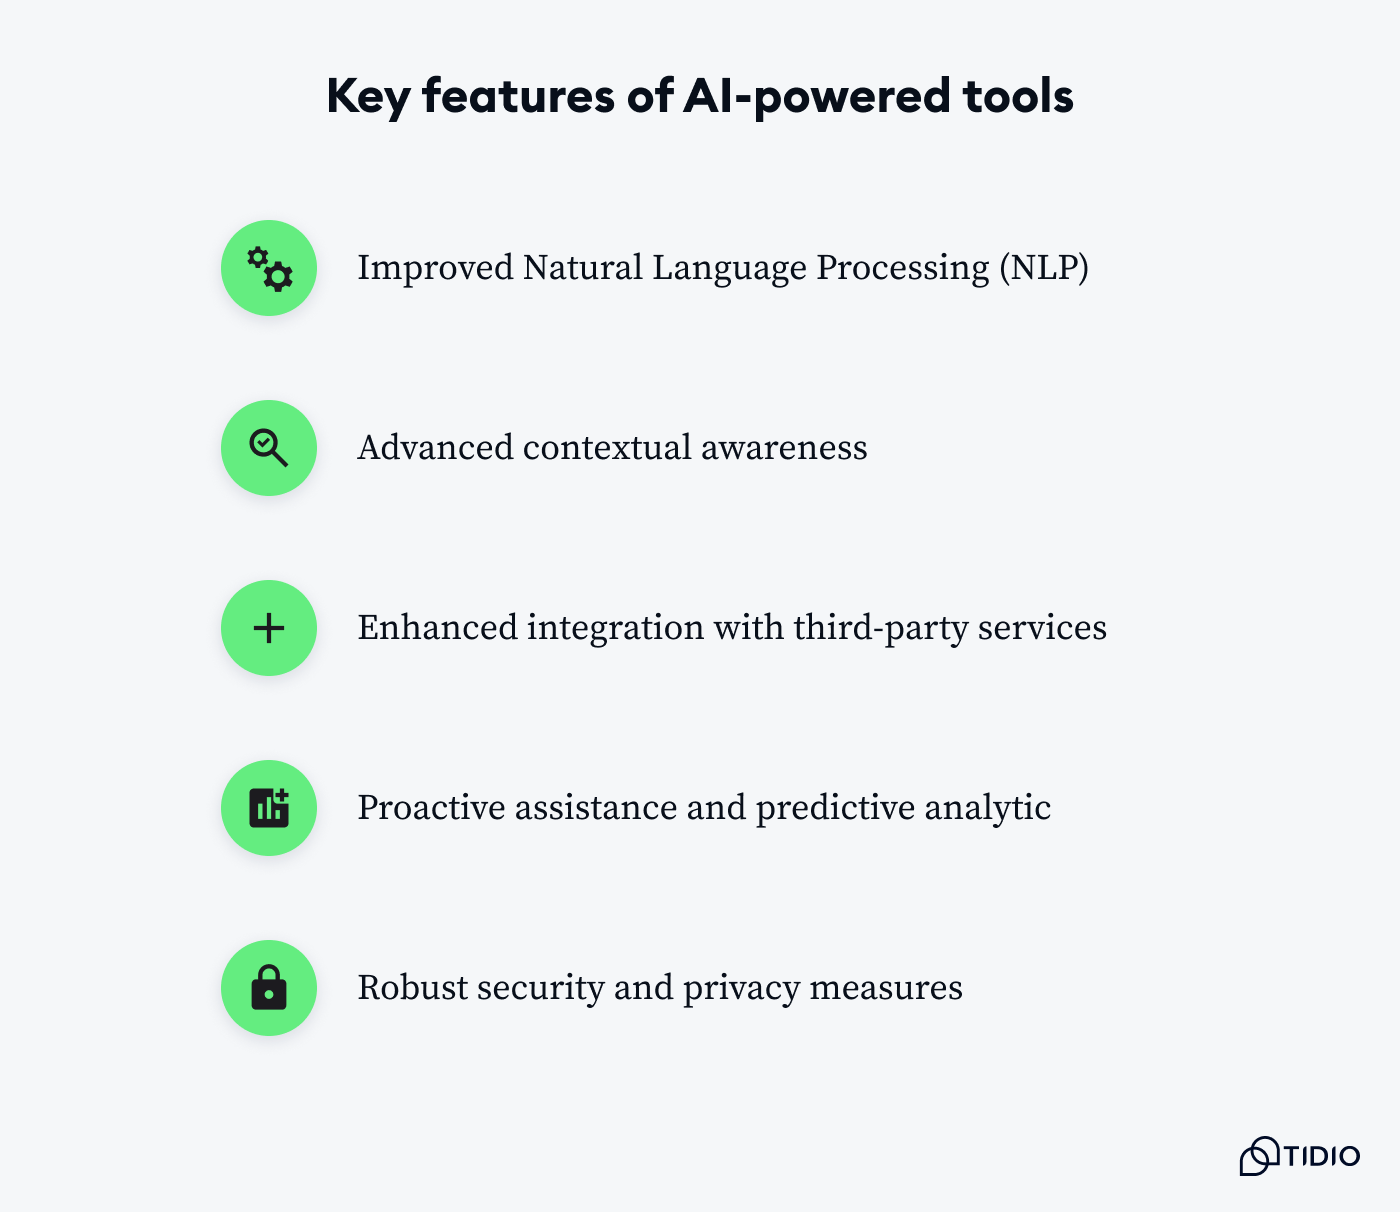 key features of AI-powered tools